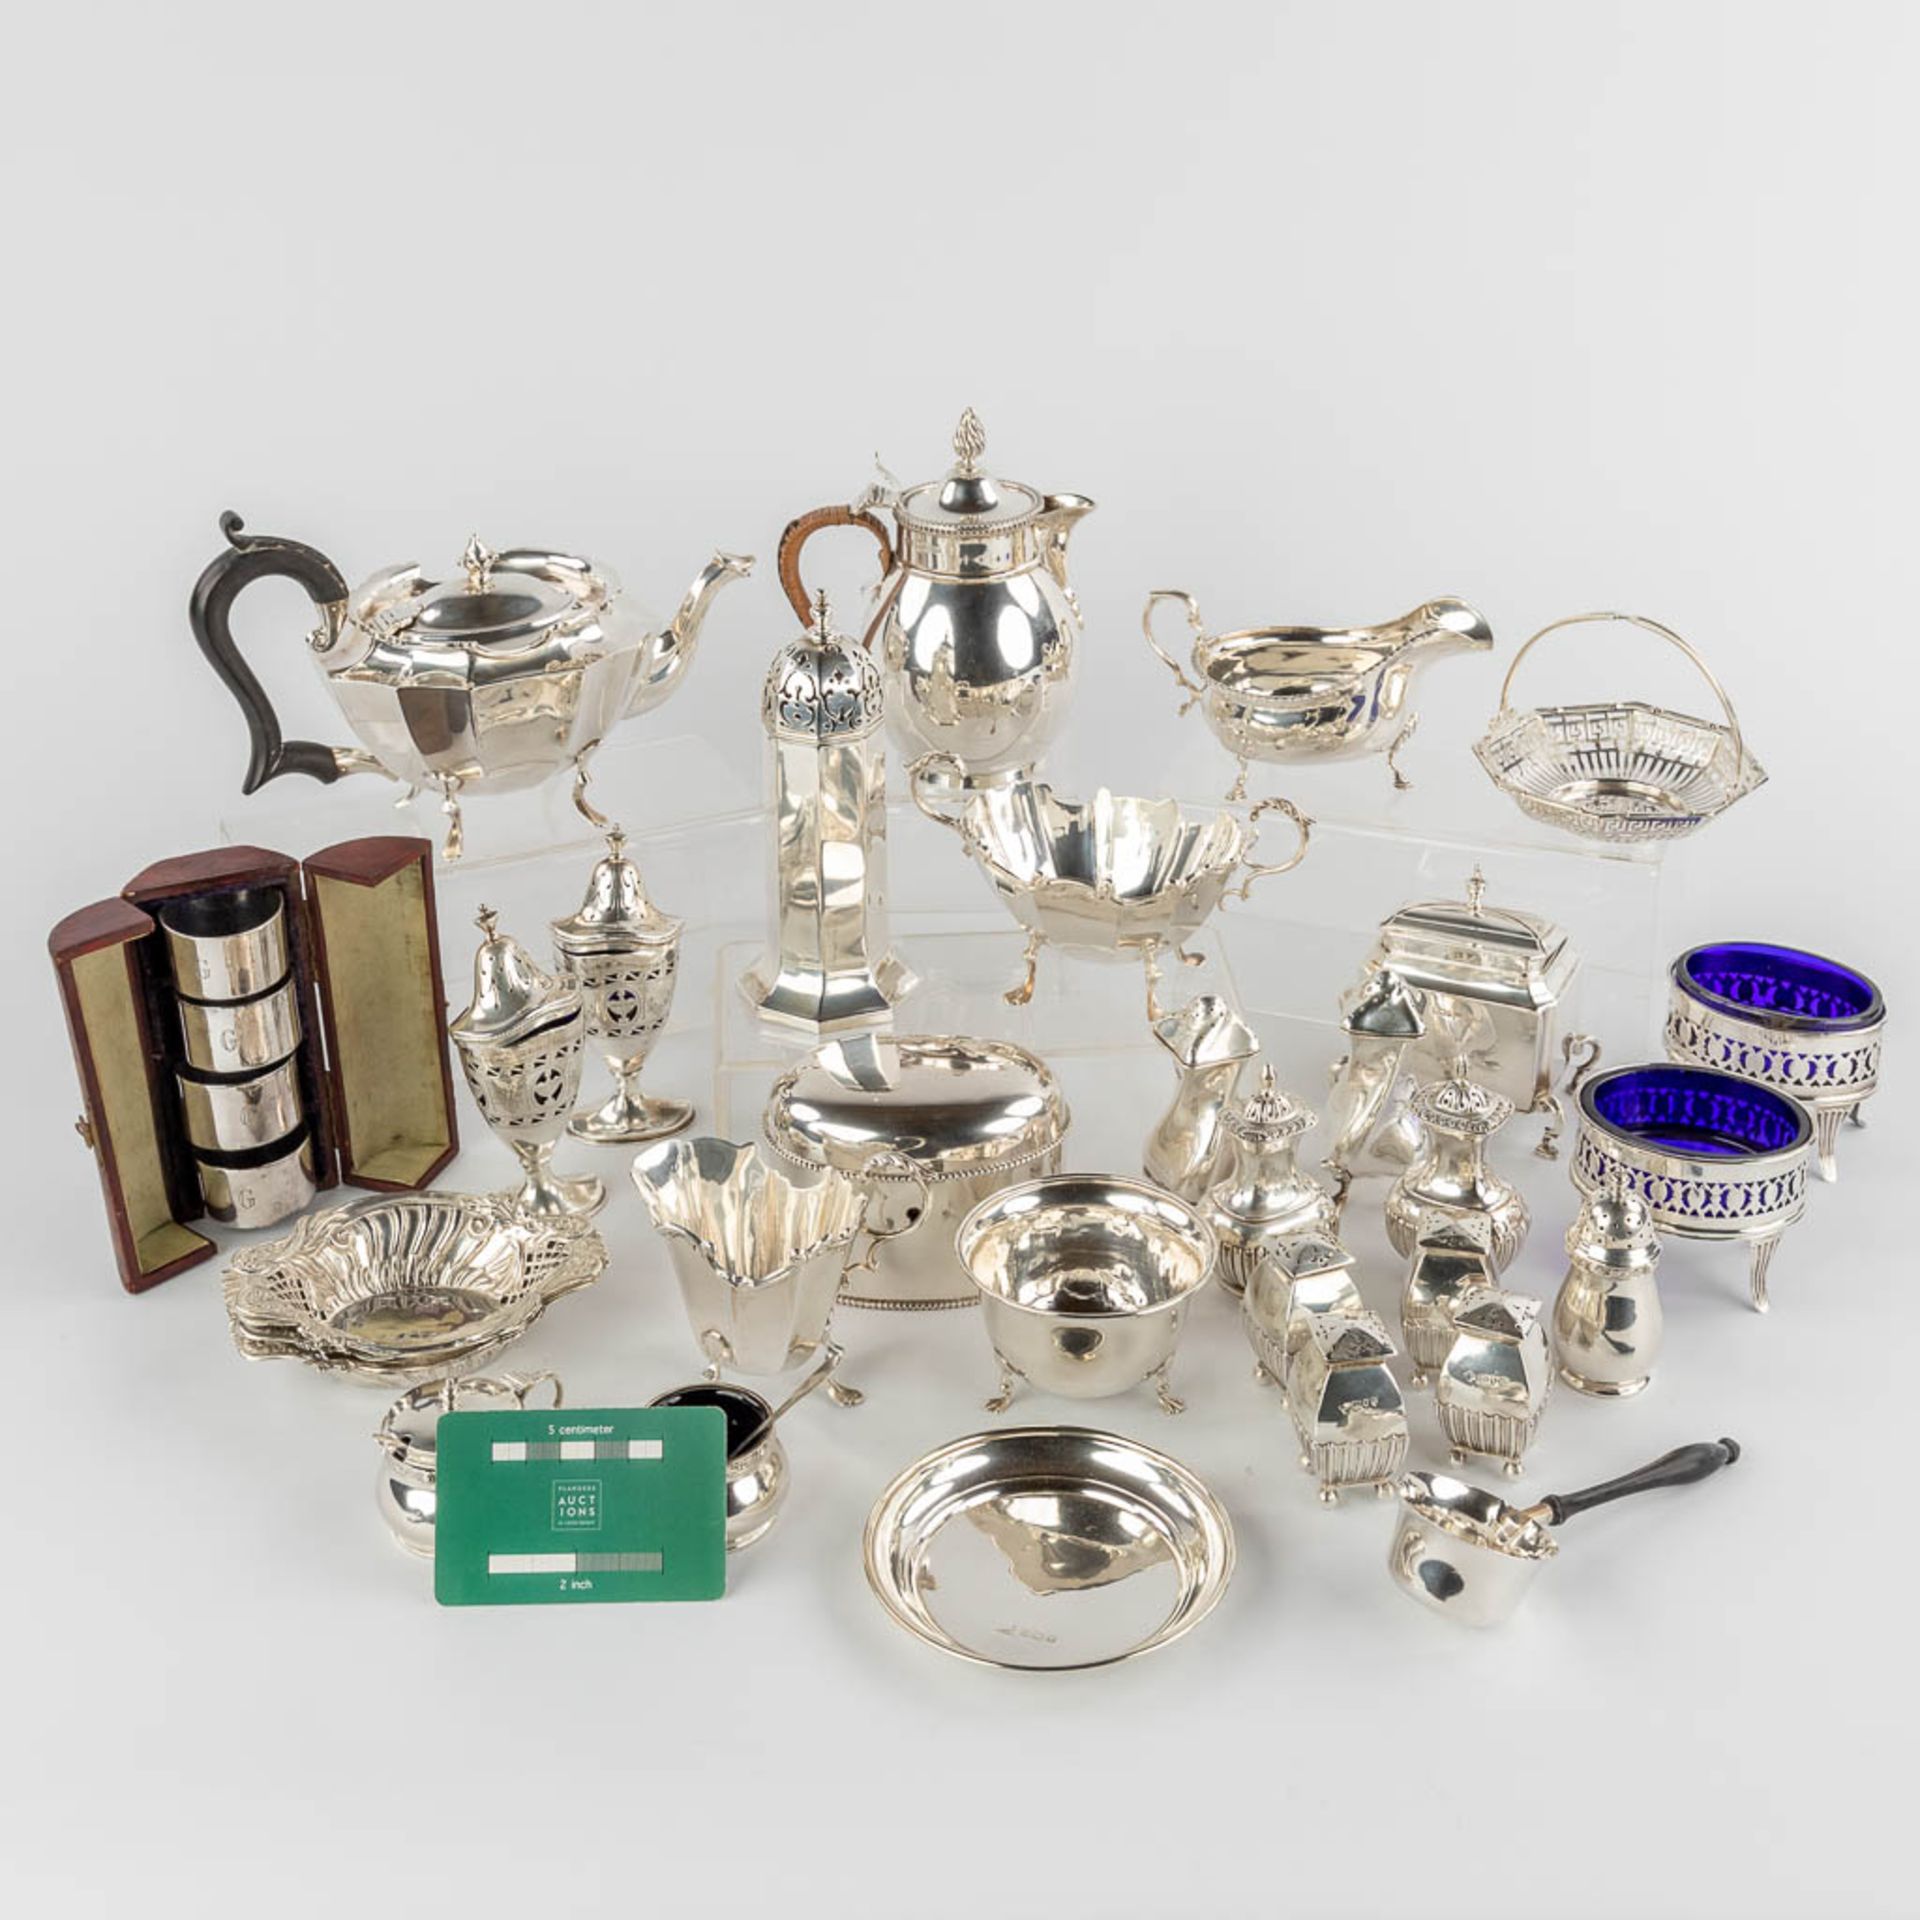 Large collection of silver items, Mostly England. 19th C. Total gross weight: 2915g. (W:22 x H:14 cm - Image 2 of 30